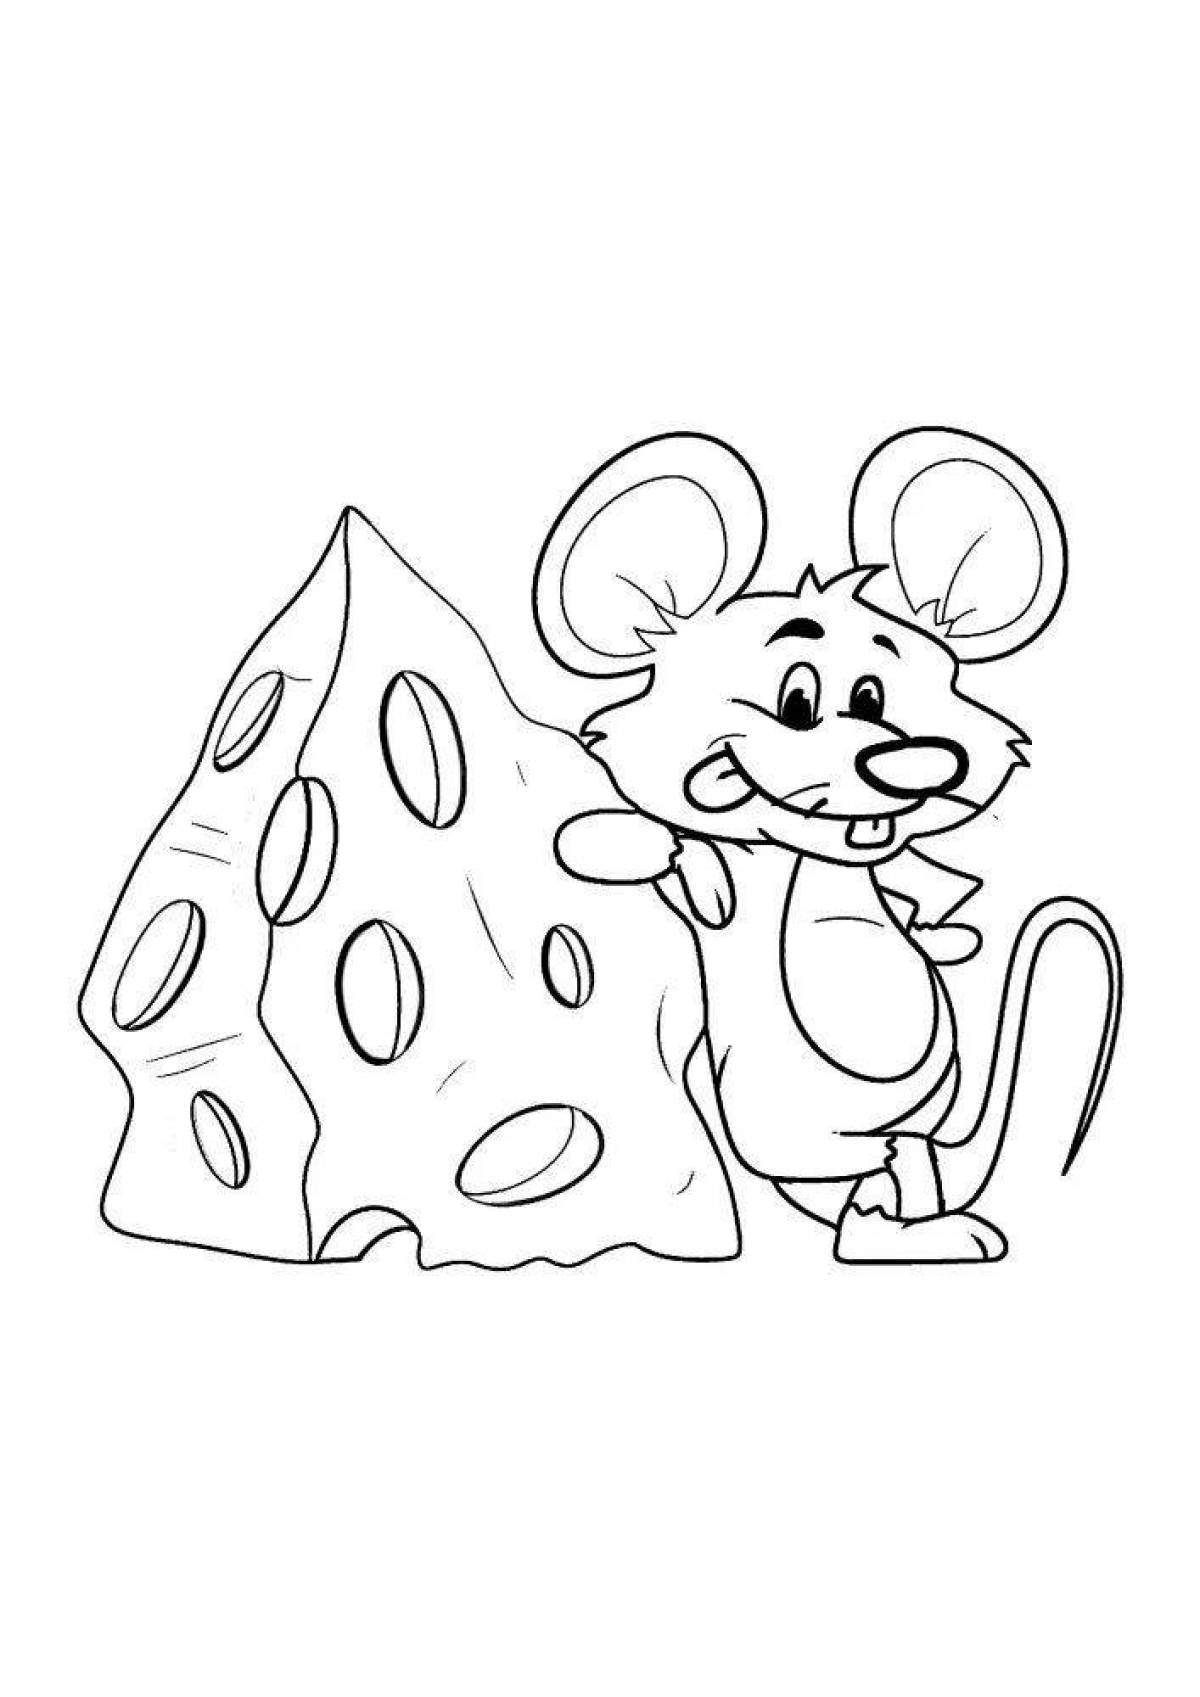 Colorful mouse with cheese coloring book